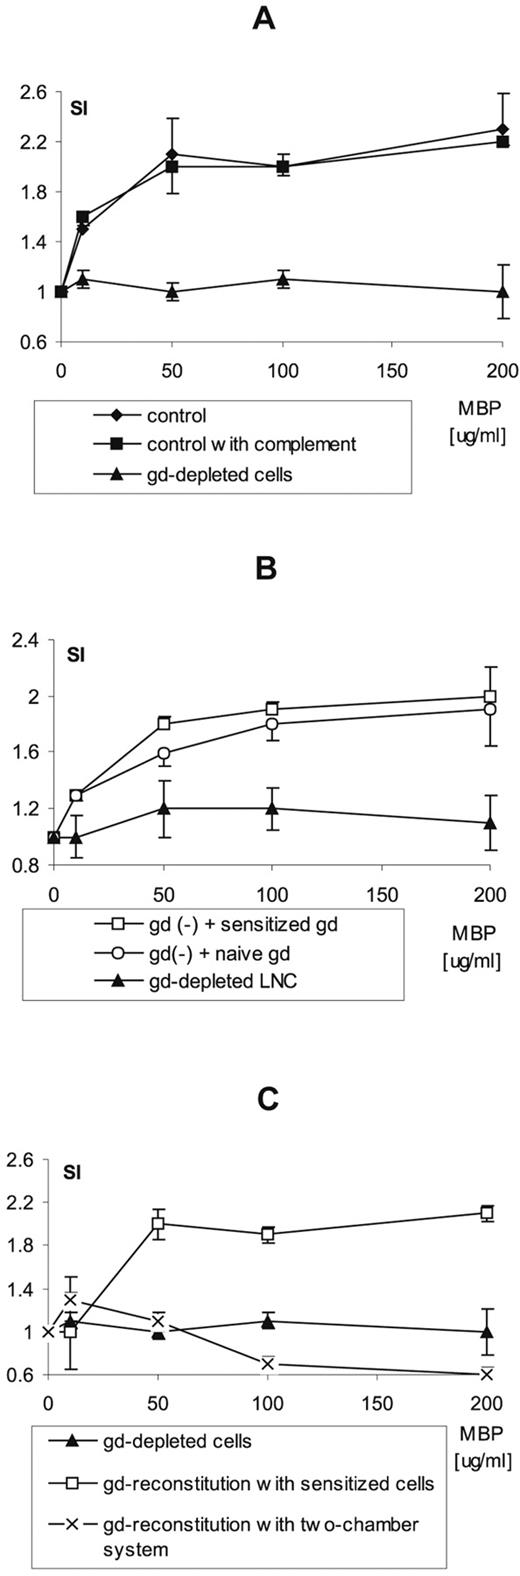 FIGURE 6. Reconstitution of γδ T cell population restores the effect of MBP-induced proliferation of LNC. γδ T cells obtained by positive selection as described in Materials and Methods from immunized (□) and naive (○) mice were mixed with LNC depleted of γδ T cells. The percentage of γδ T cells in the reconstituted population corresponded to the proportion before depletion. Each point represents mean SI (+SD). A, Nondepleted population of LNC (♦) and LNC incubated with rabbit complement (▪) and γδ T cell-depleted LNC (▴) were used as controls. B, Reconstitution with both γδ T cells from either immunized or naive mice restored MBP-induced LNC proliferation (p < 0.05). C, MBP proliferation was restored only when direct contact between γδ T cells and LNC depleted of γδ T cells was present (□), and not when γδ T cells and LNC depleted of γδ T cell were separated by an anopore membrane (x) (p < 0.05).